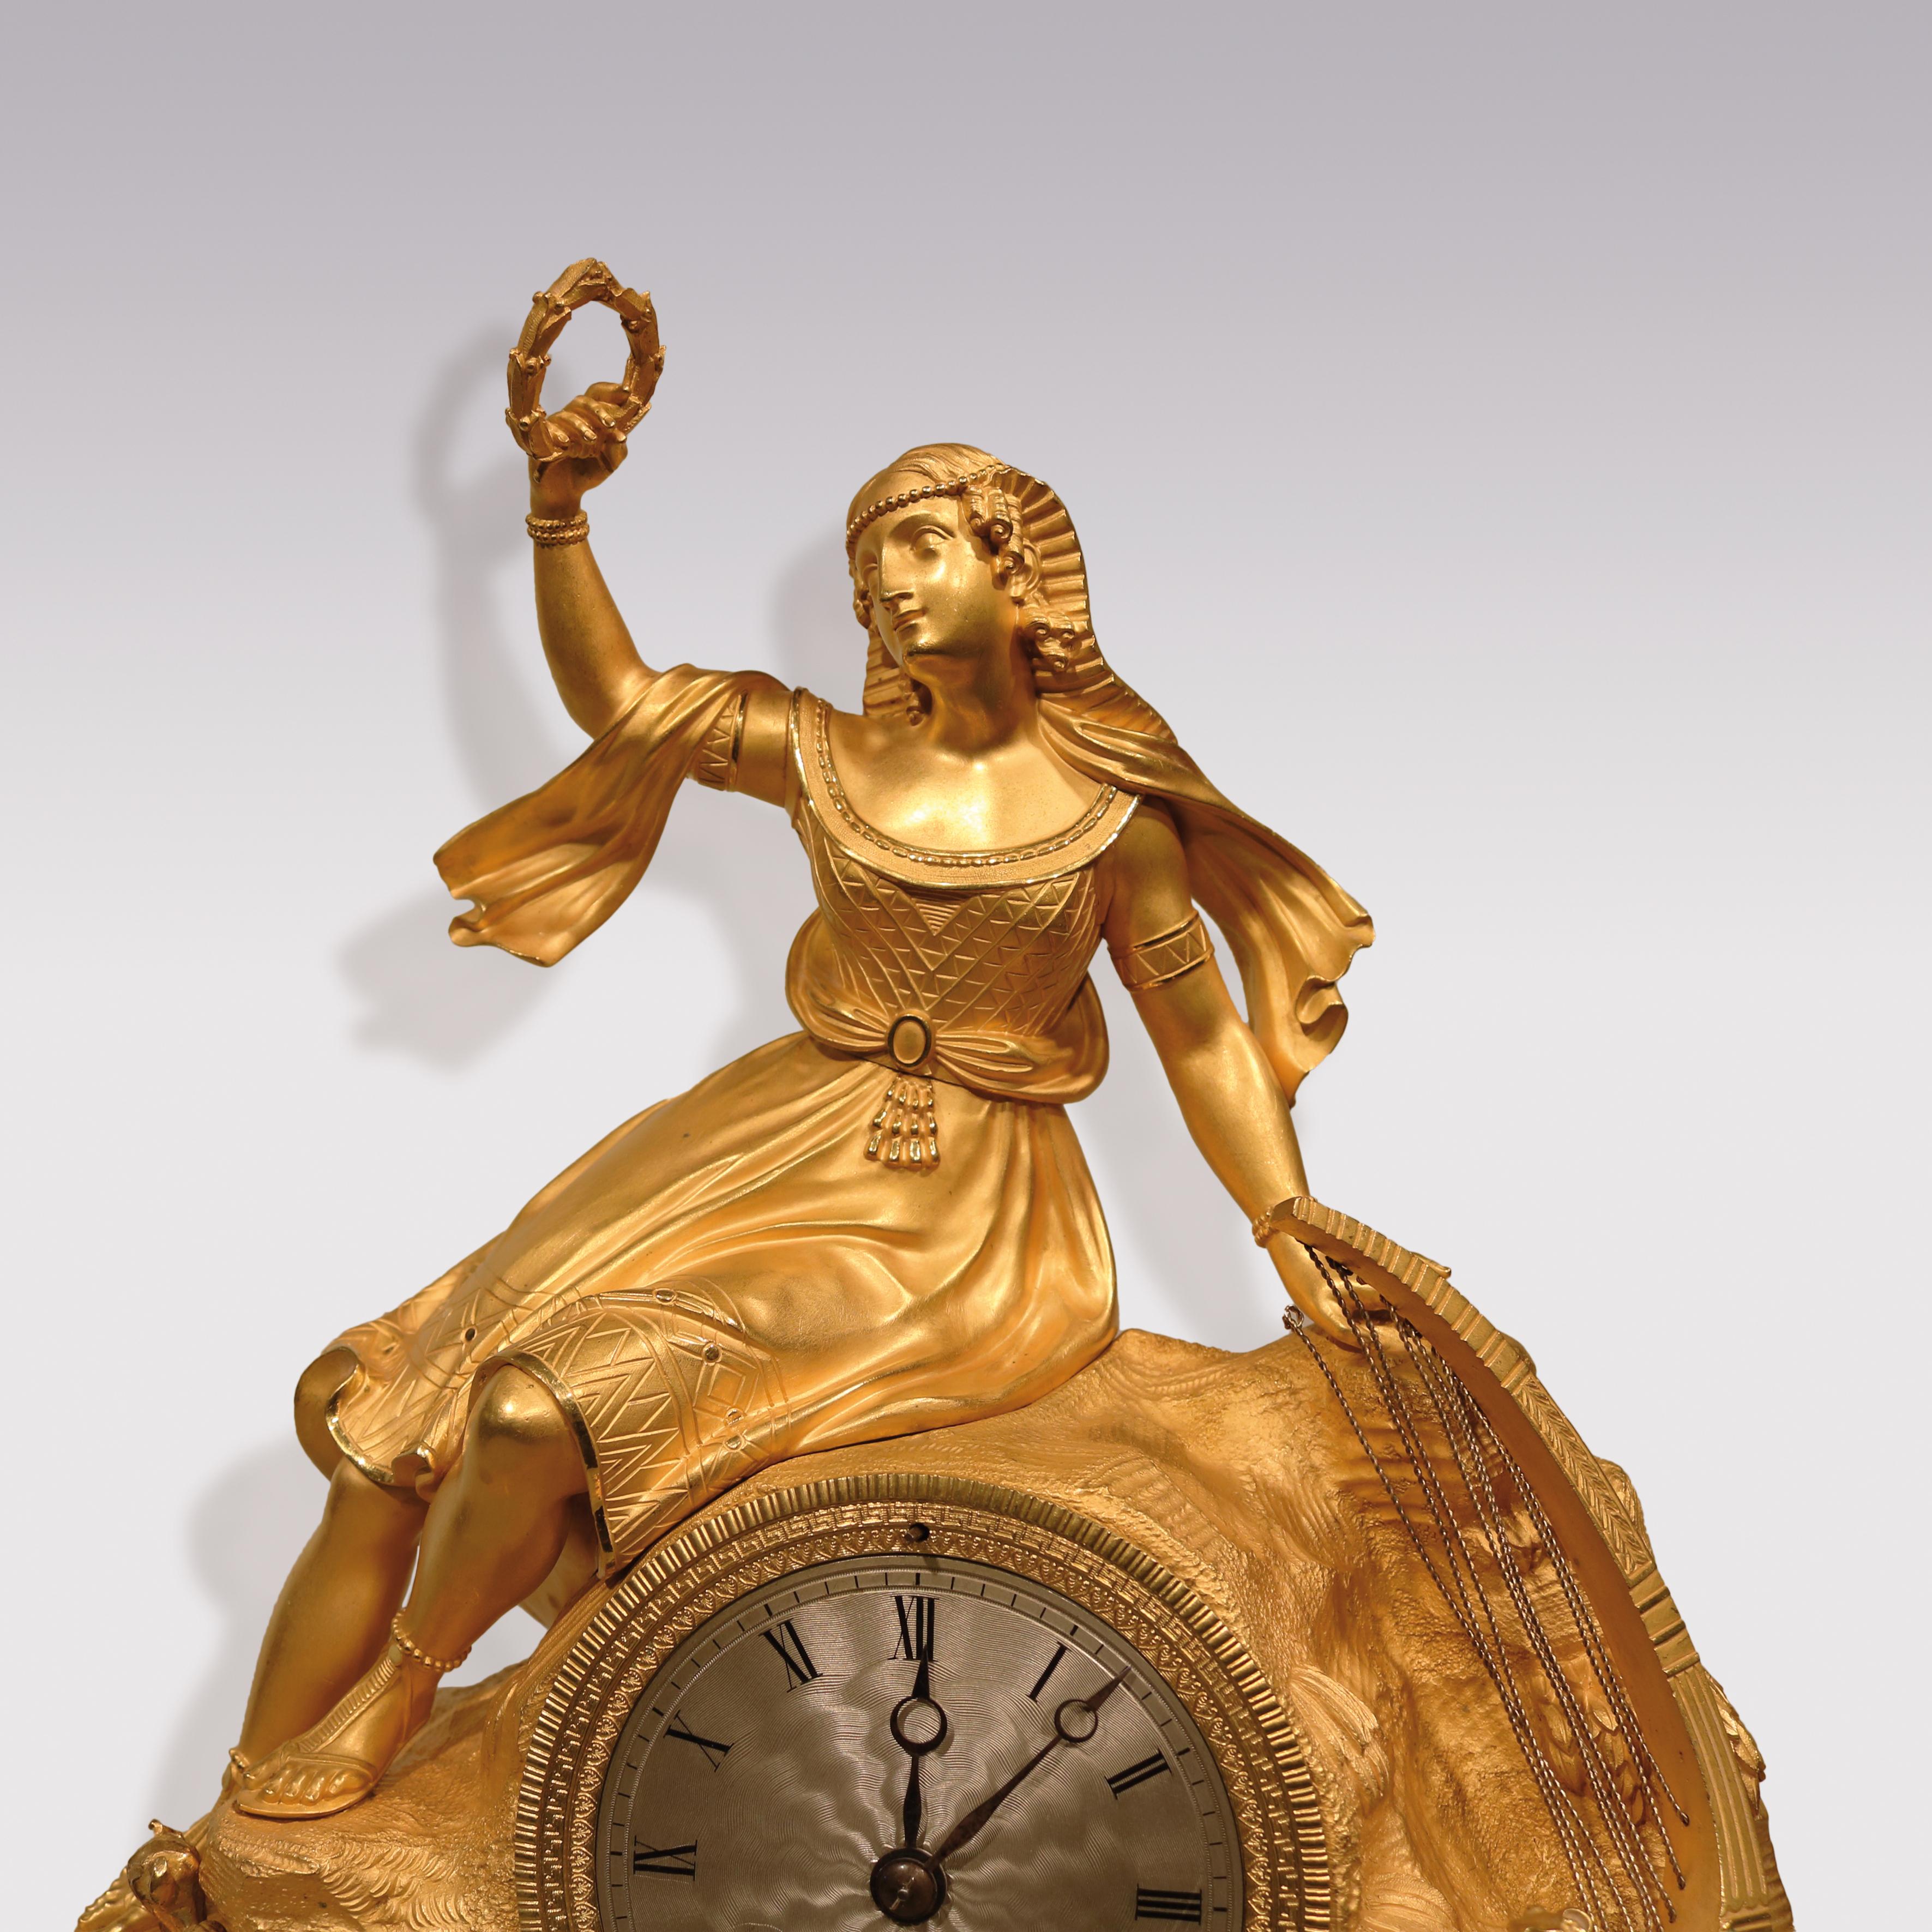 An impressive early 19th century French clock by T H re Le Roy, having 8 day striking silk-suspension movement with silver dial. The clock, mounted in ormolu case depicting Egyptian lady with lyre perched on rocks holding wreath, supported on plinth